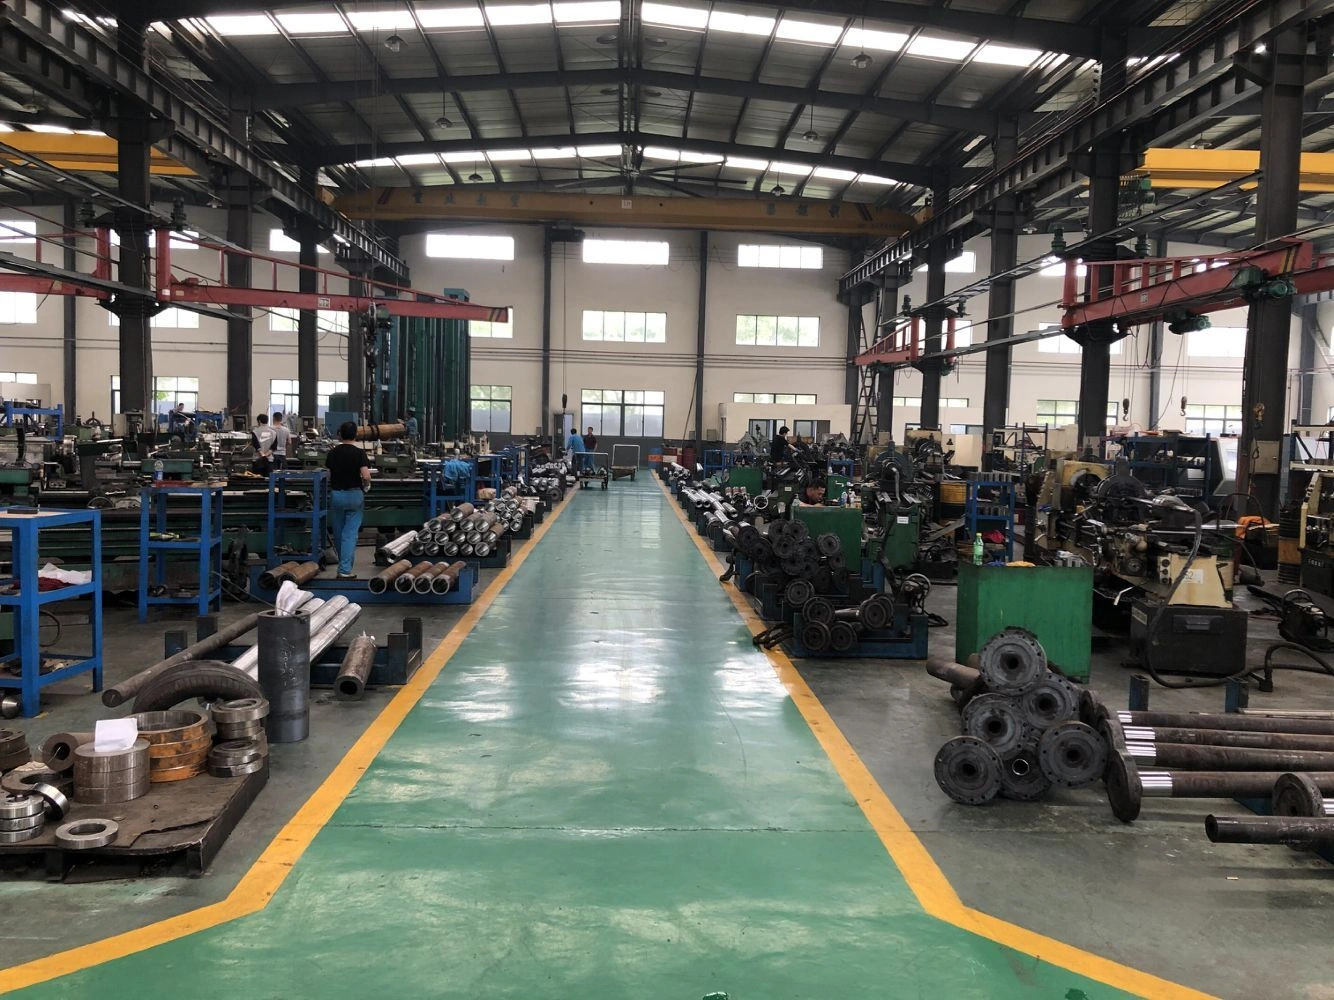 injection molding machine screw barrel, E.J.S INDUSTRY CO., LTD has them, with different surface treatment, including nitiriding, chrome-plating, carbide liner etc.